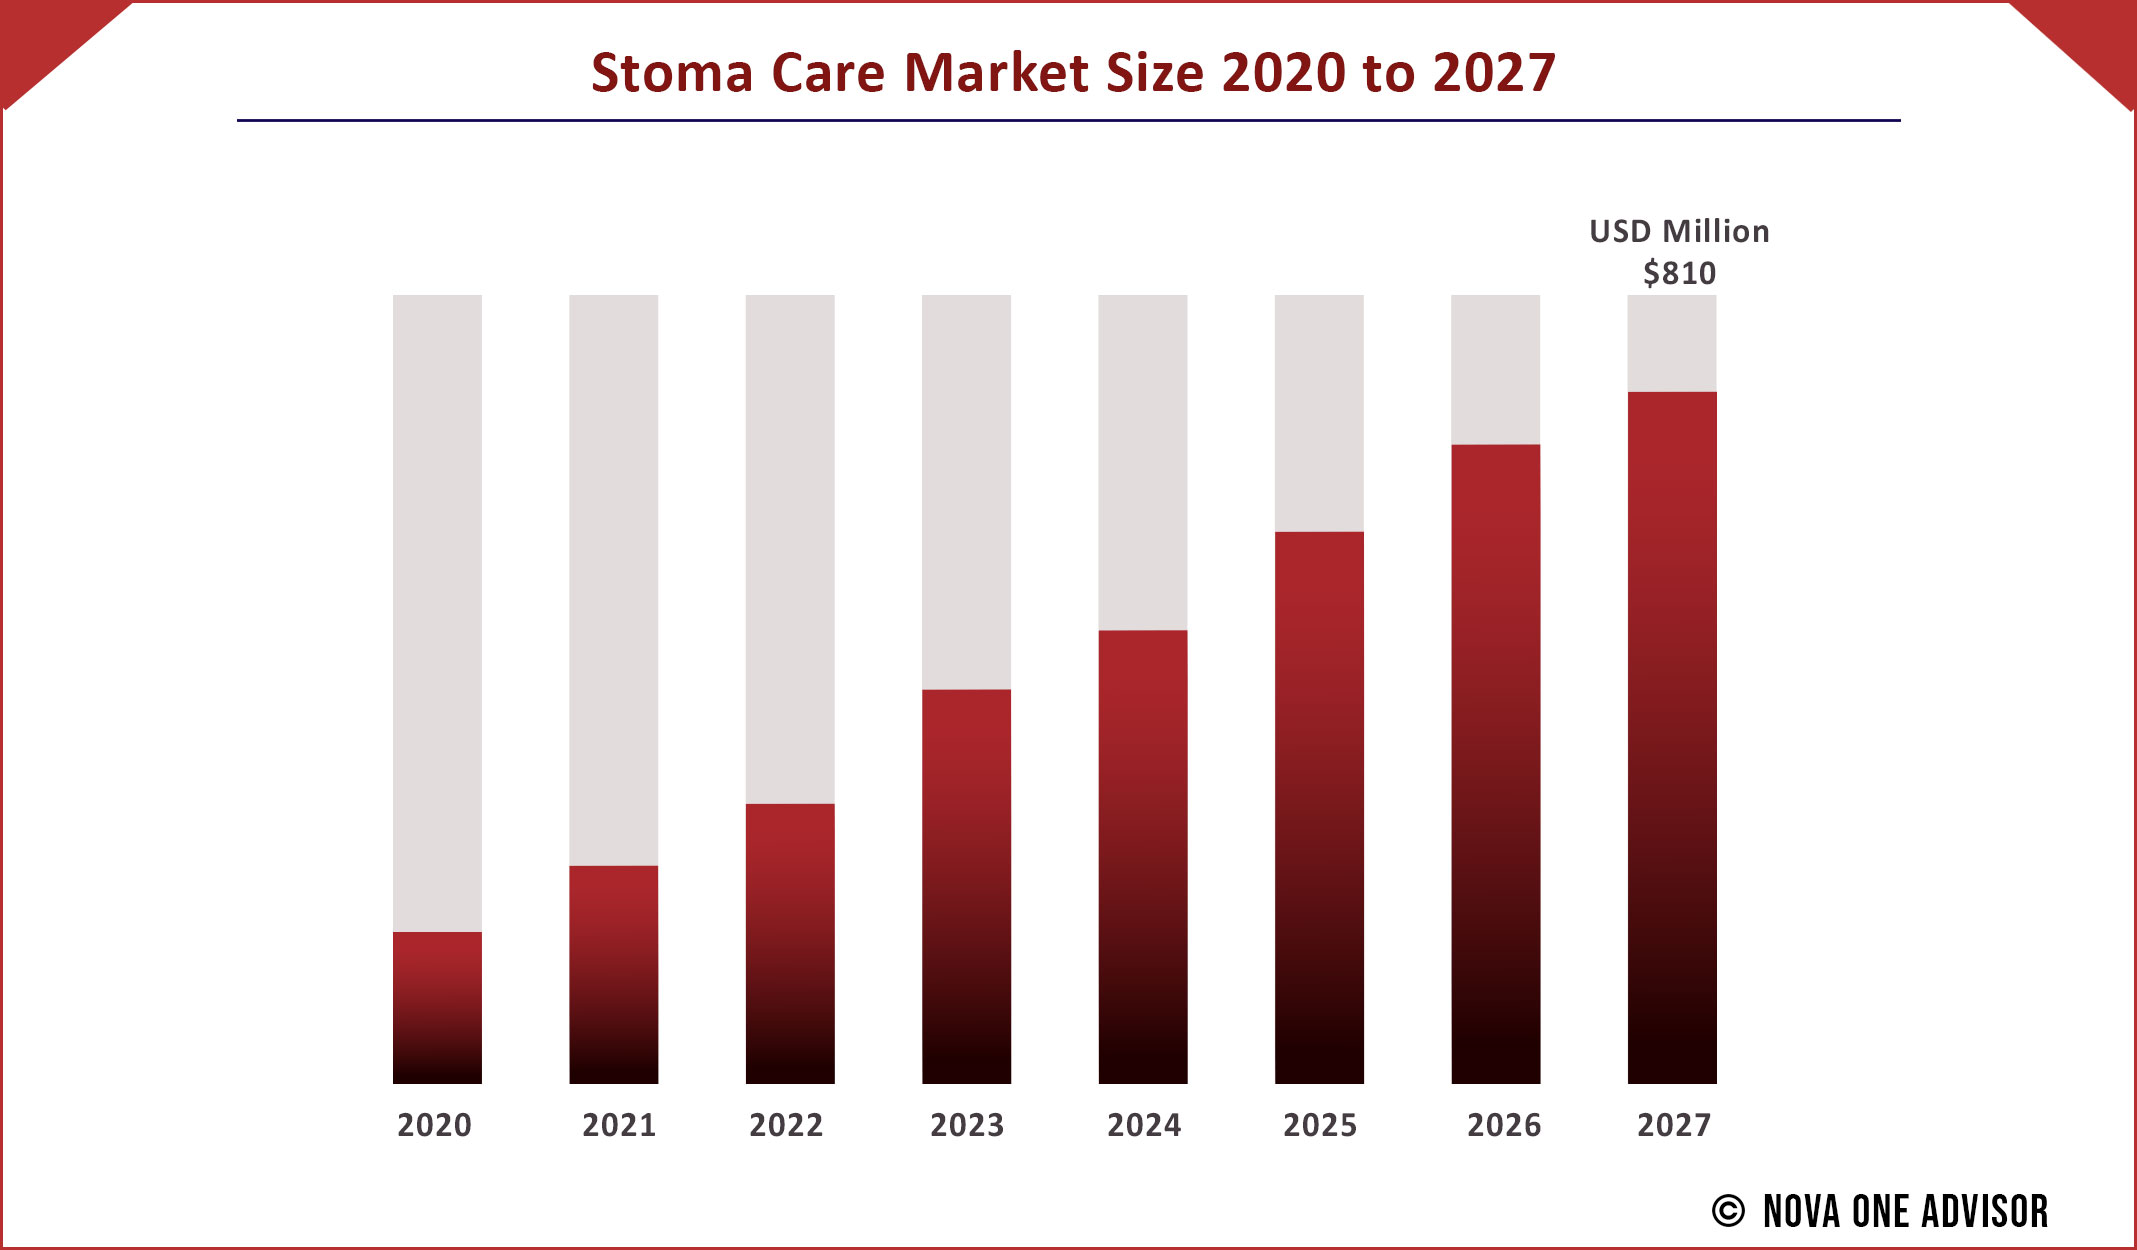 Stoma Care Market Size 2020 to 2027